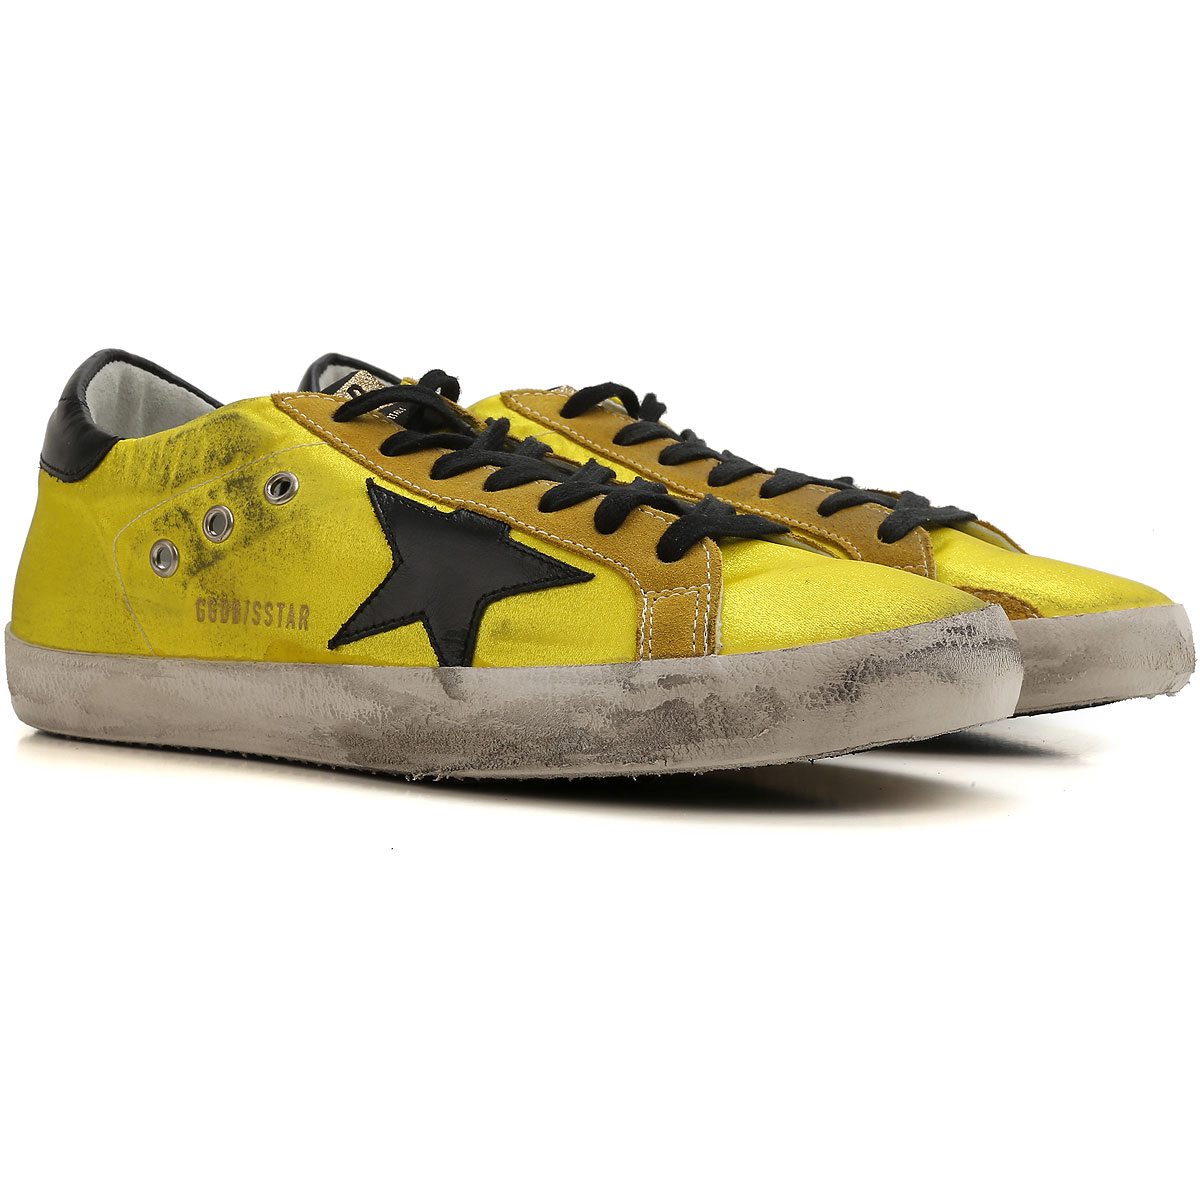 Mens Shoes Golden Goose, Style code: g31ms590-c82-